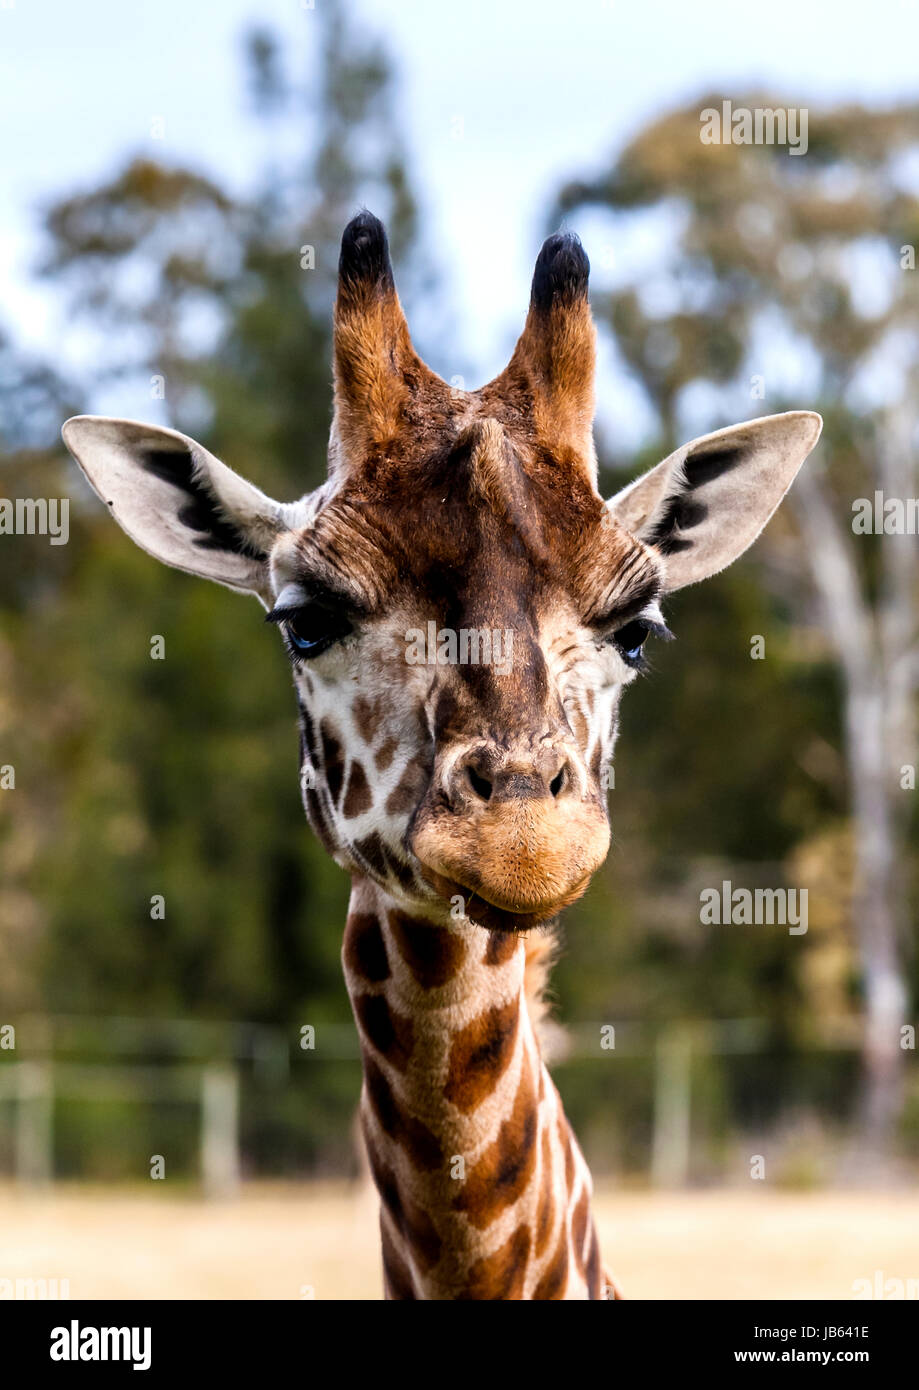 Close up of giraffe's head and neck Stock Photo